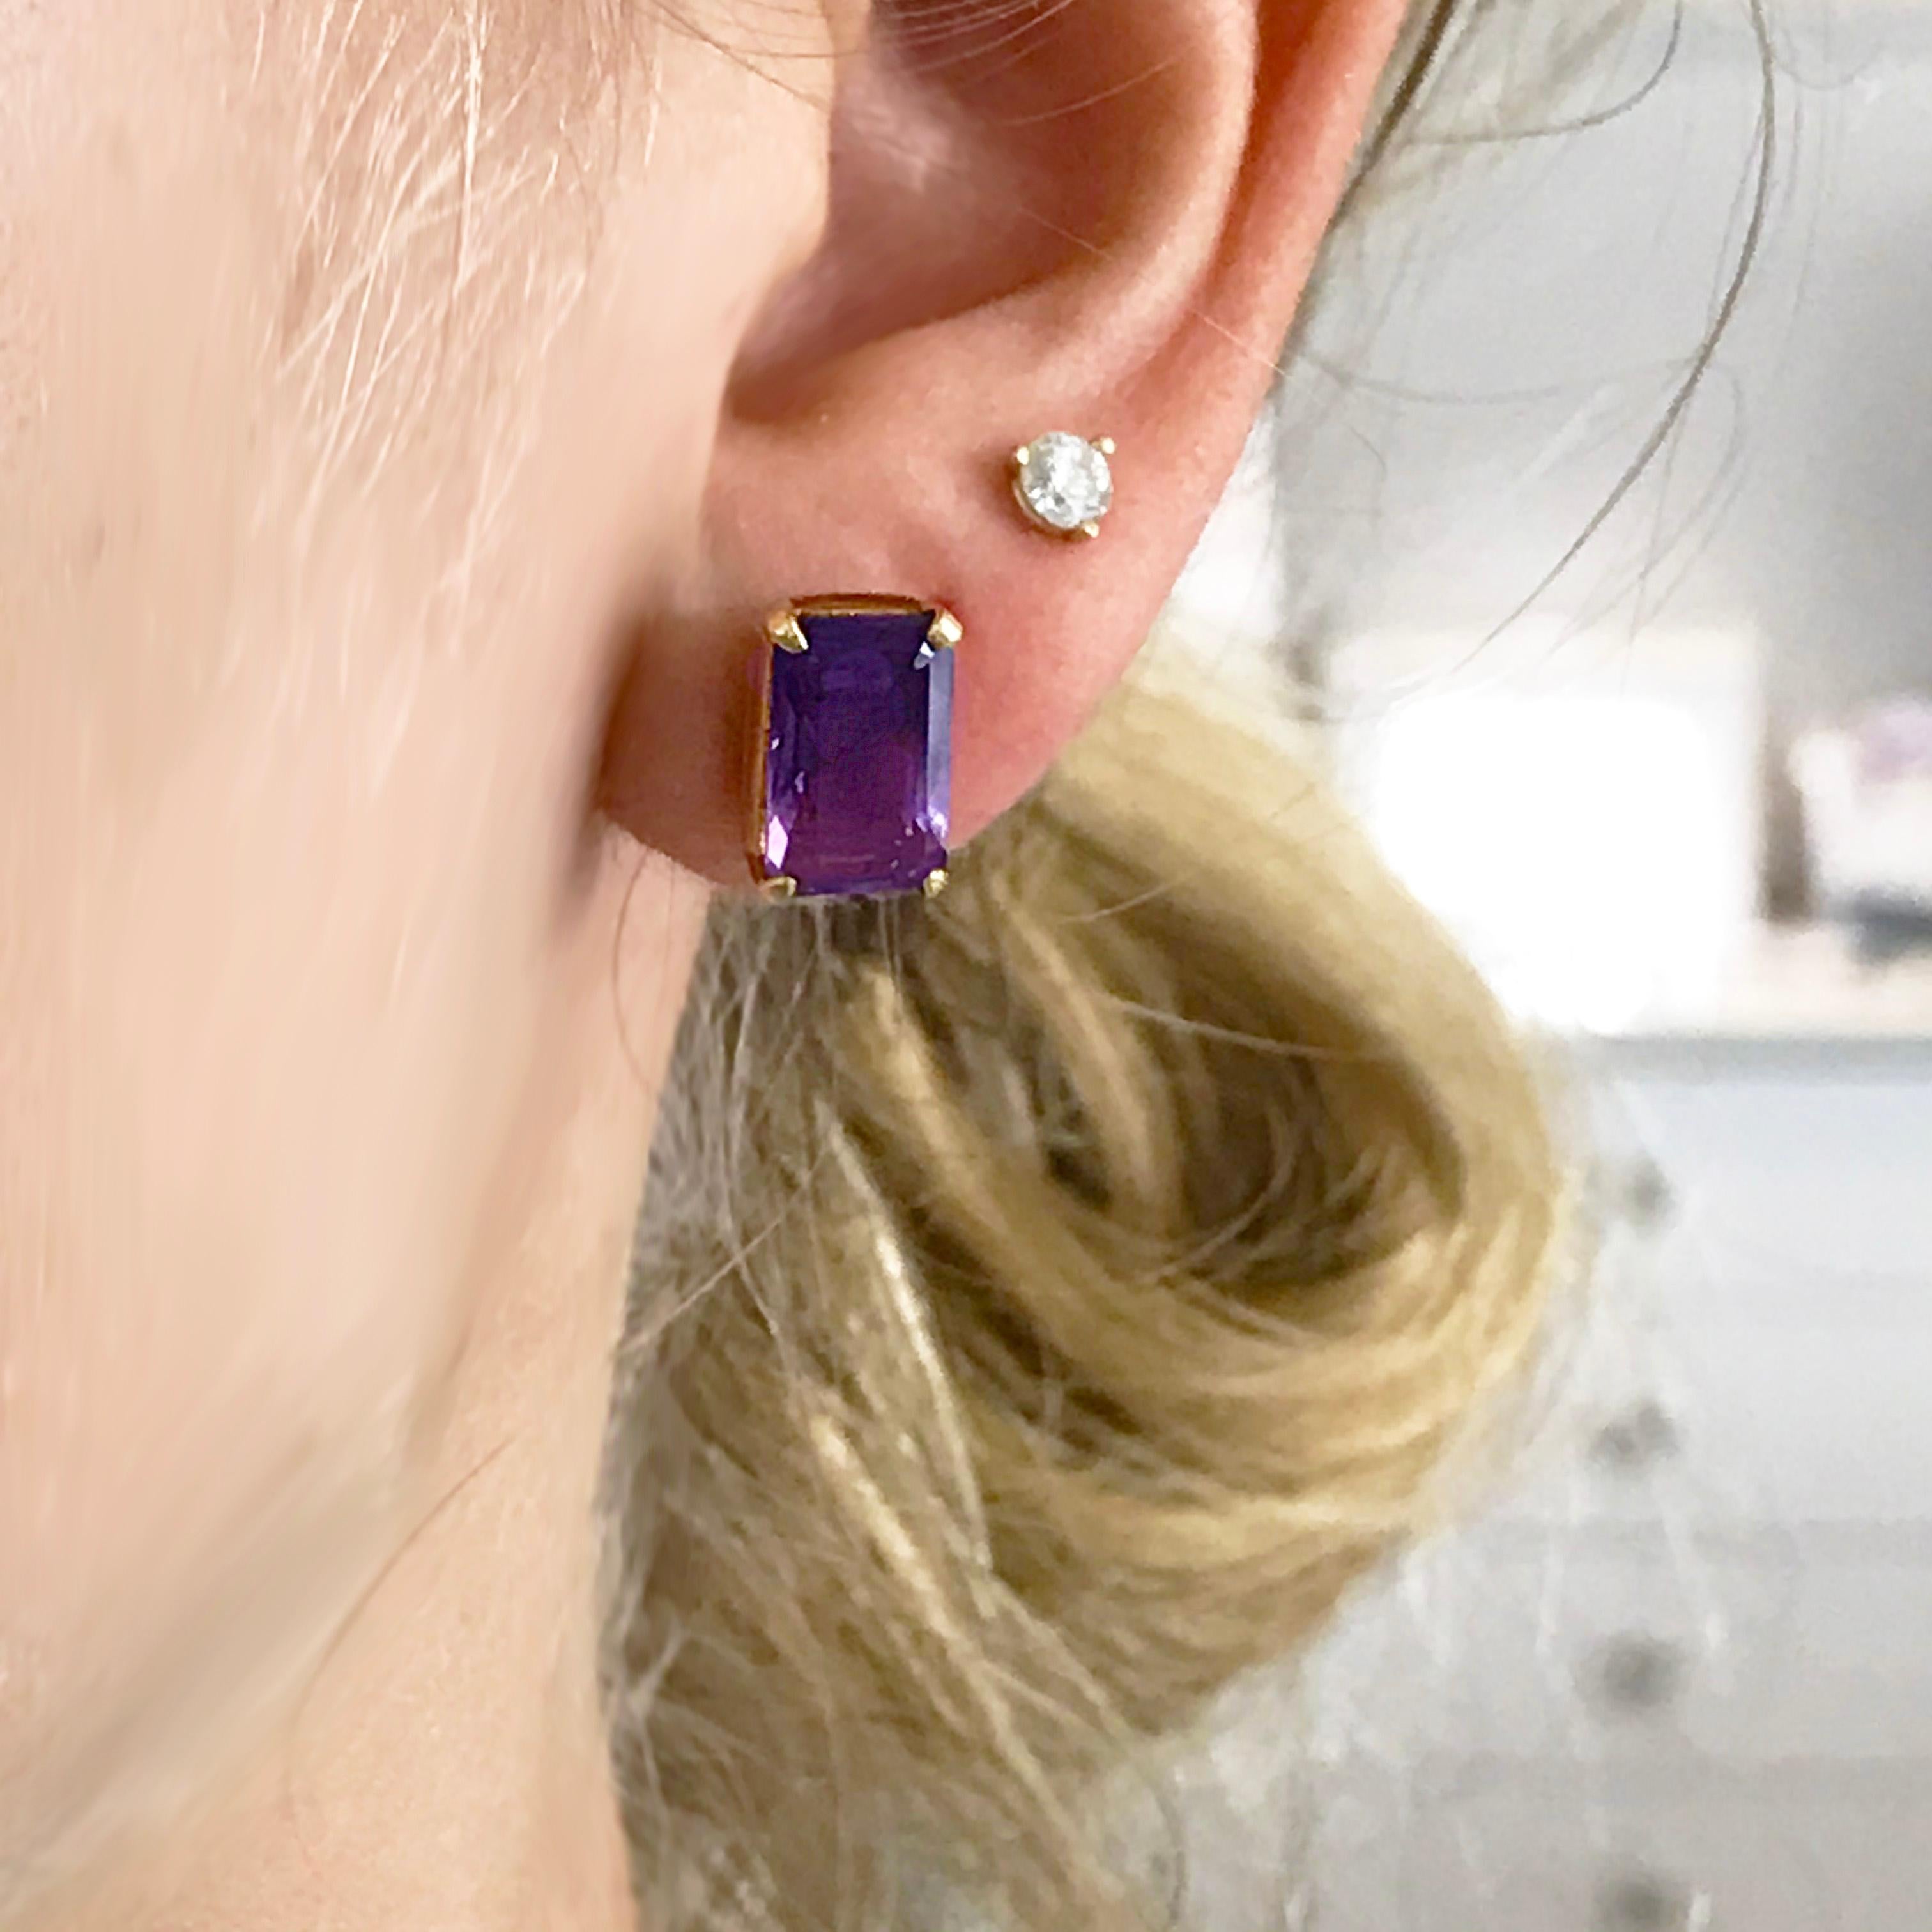 18 karat gold is such a rich color and matched with these gorgeous amethyst that are emerald cut, they are truly stunning!
Metal Quality: 18K Yellow Gold
Earring Type: Studs
Earring Measurements: 10.42 by 6.75 Millimeters 
Gemstone: